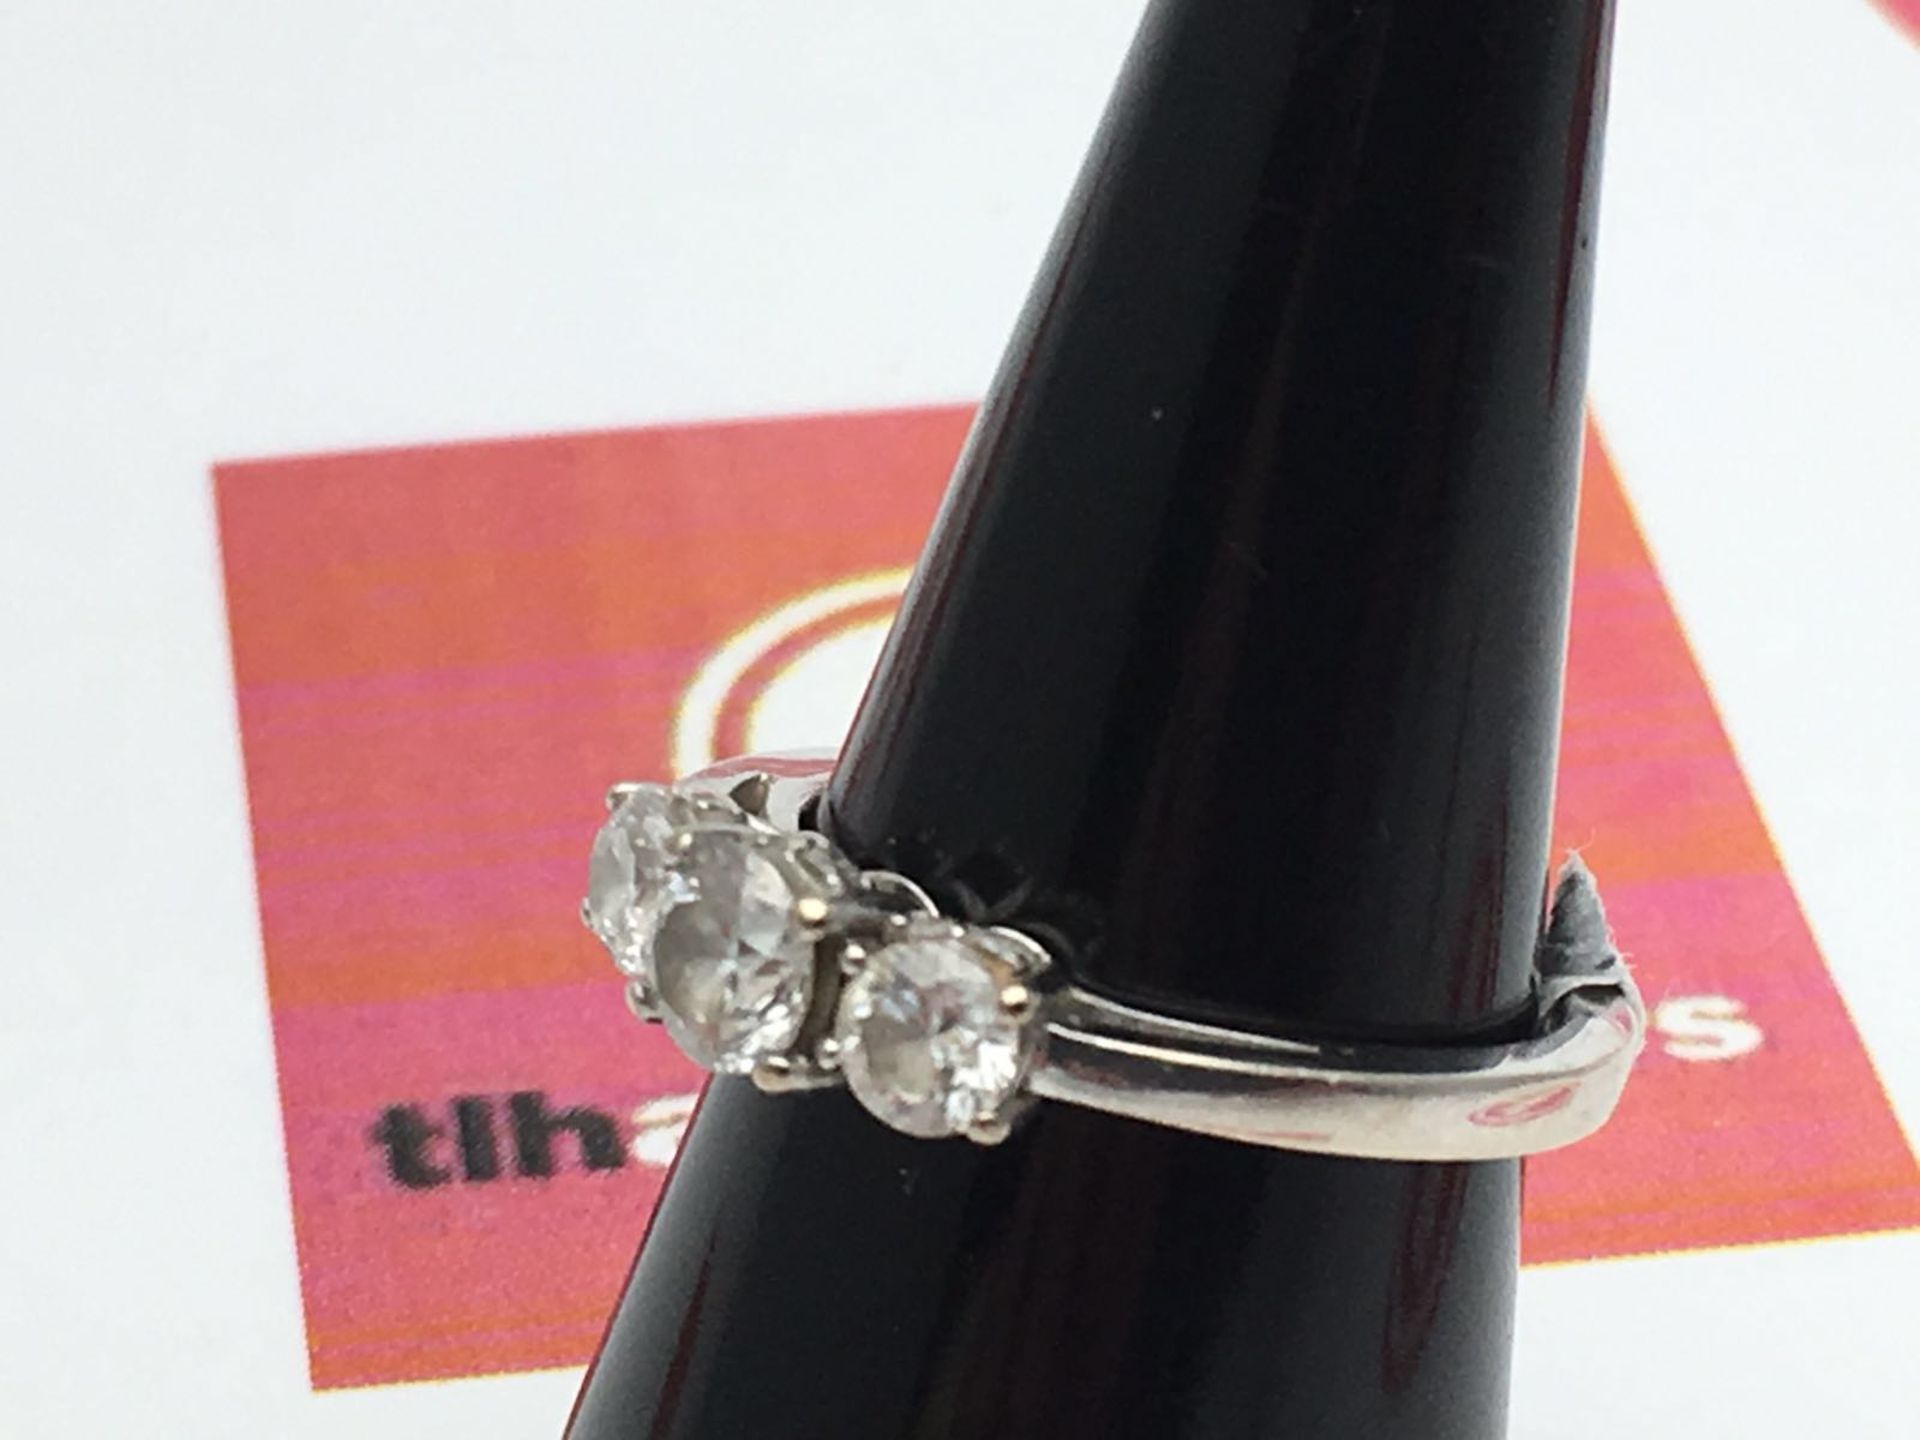 A STUNNING WHITE GOLD RING ORIGINALLY SUPPLIED BY GOLDSMITHS £3,000 SET WITH 3no BRILLIANT ROUND CUT - Image 2 of 6